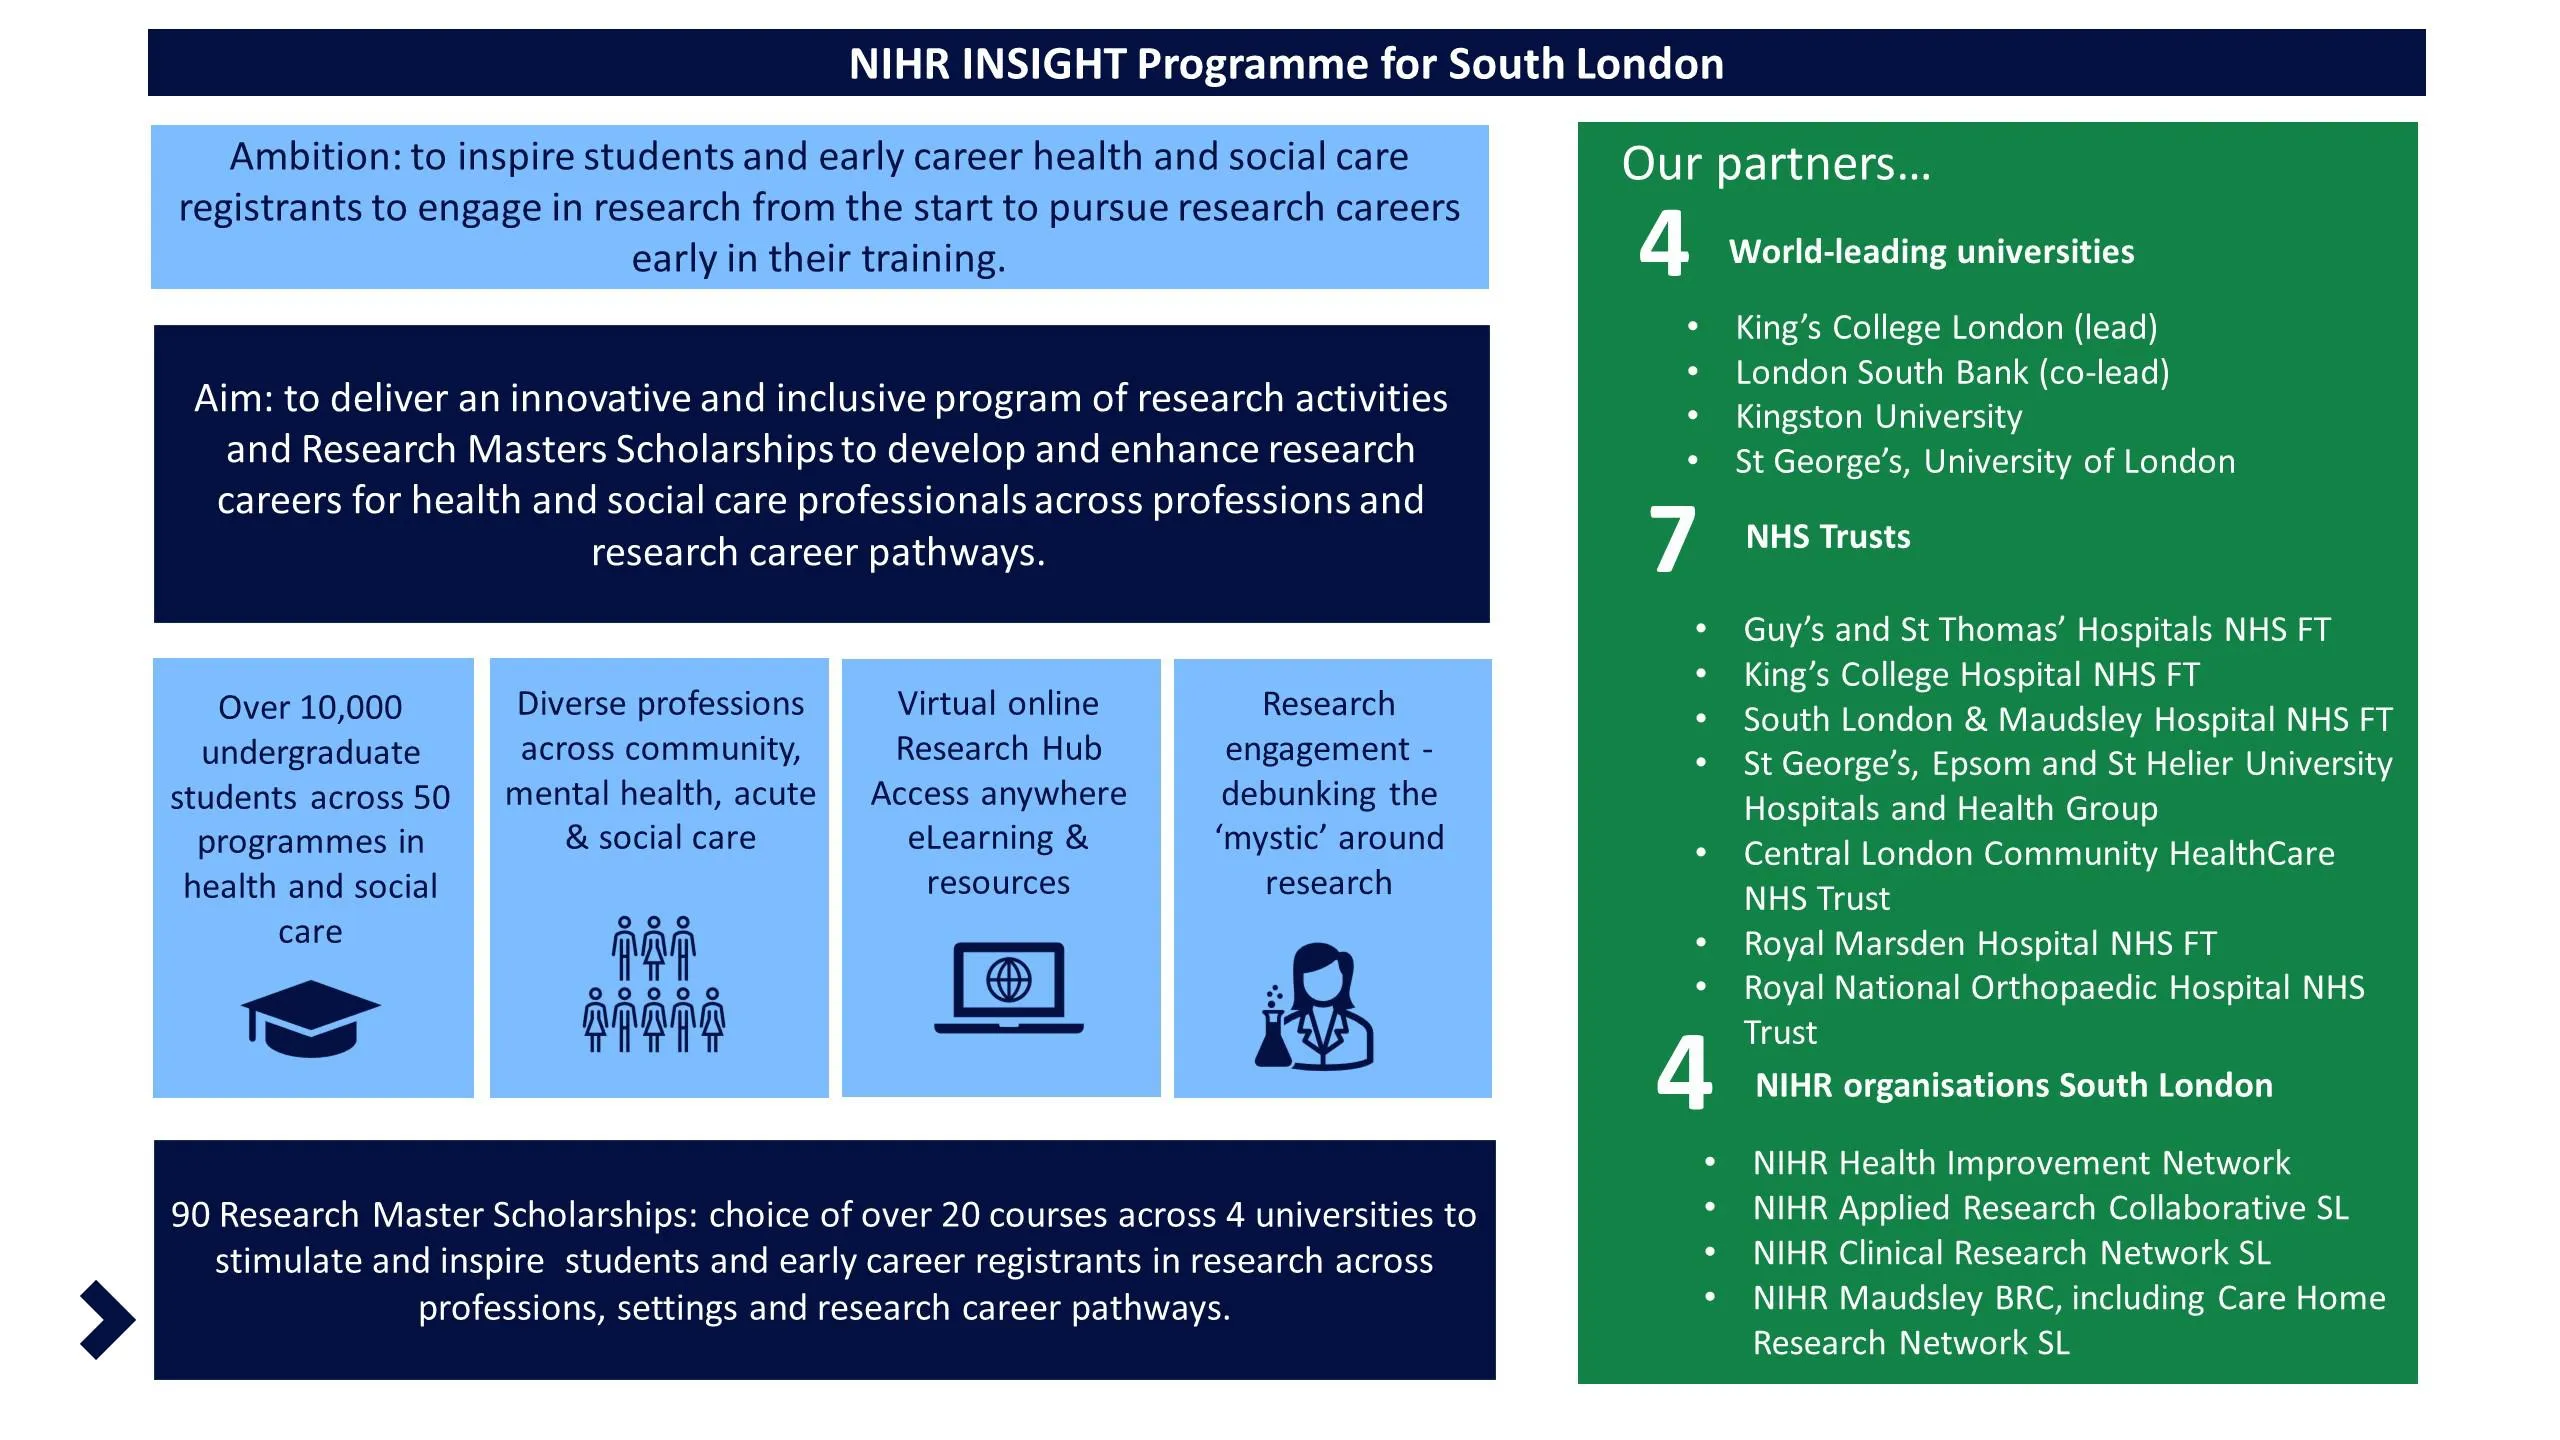 New NIHR Insight Programme for South London infographic